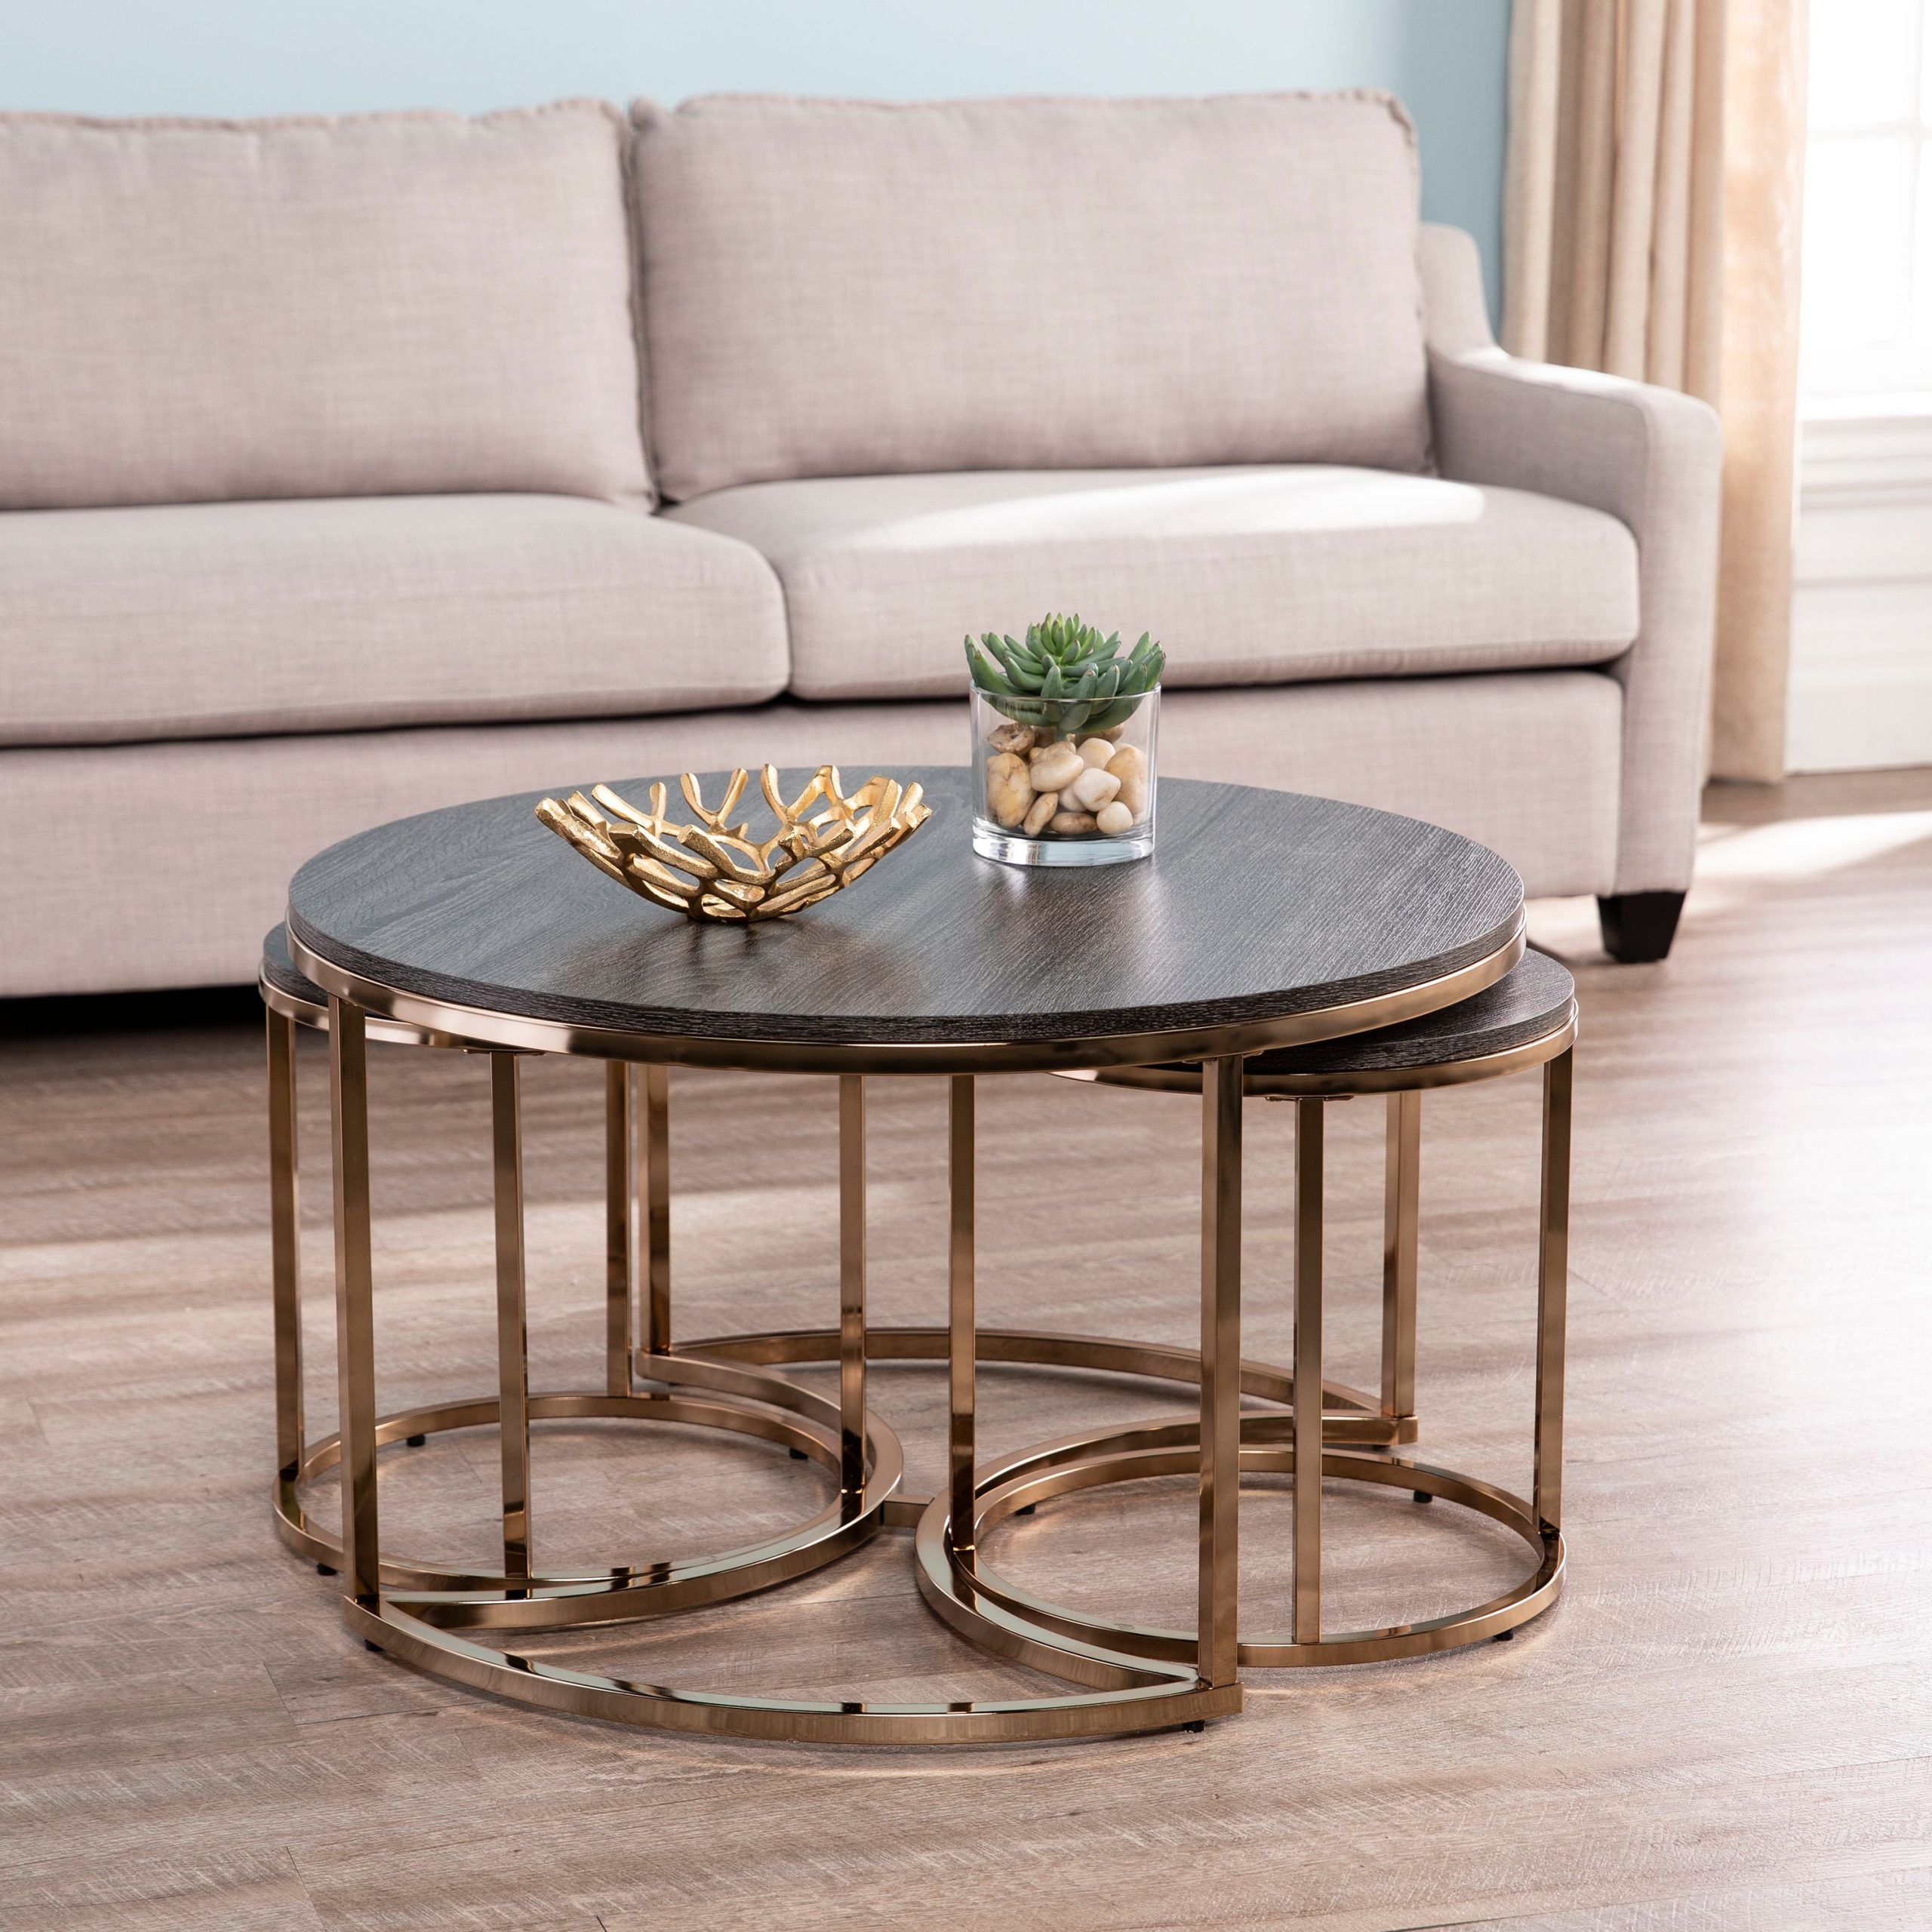 Coffee Tables Of 3 Nesting Tables Within Well Known Ember Interiors Lokyle Metal And Wood Round Nesting Coffee Table,  (View 7 of 15)